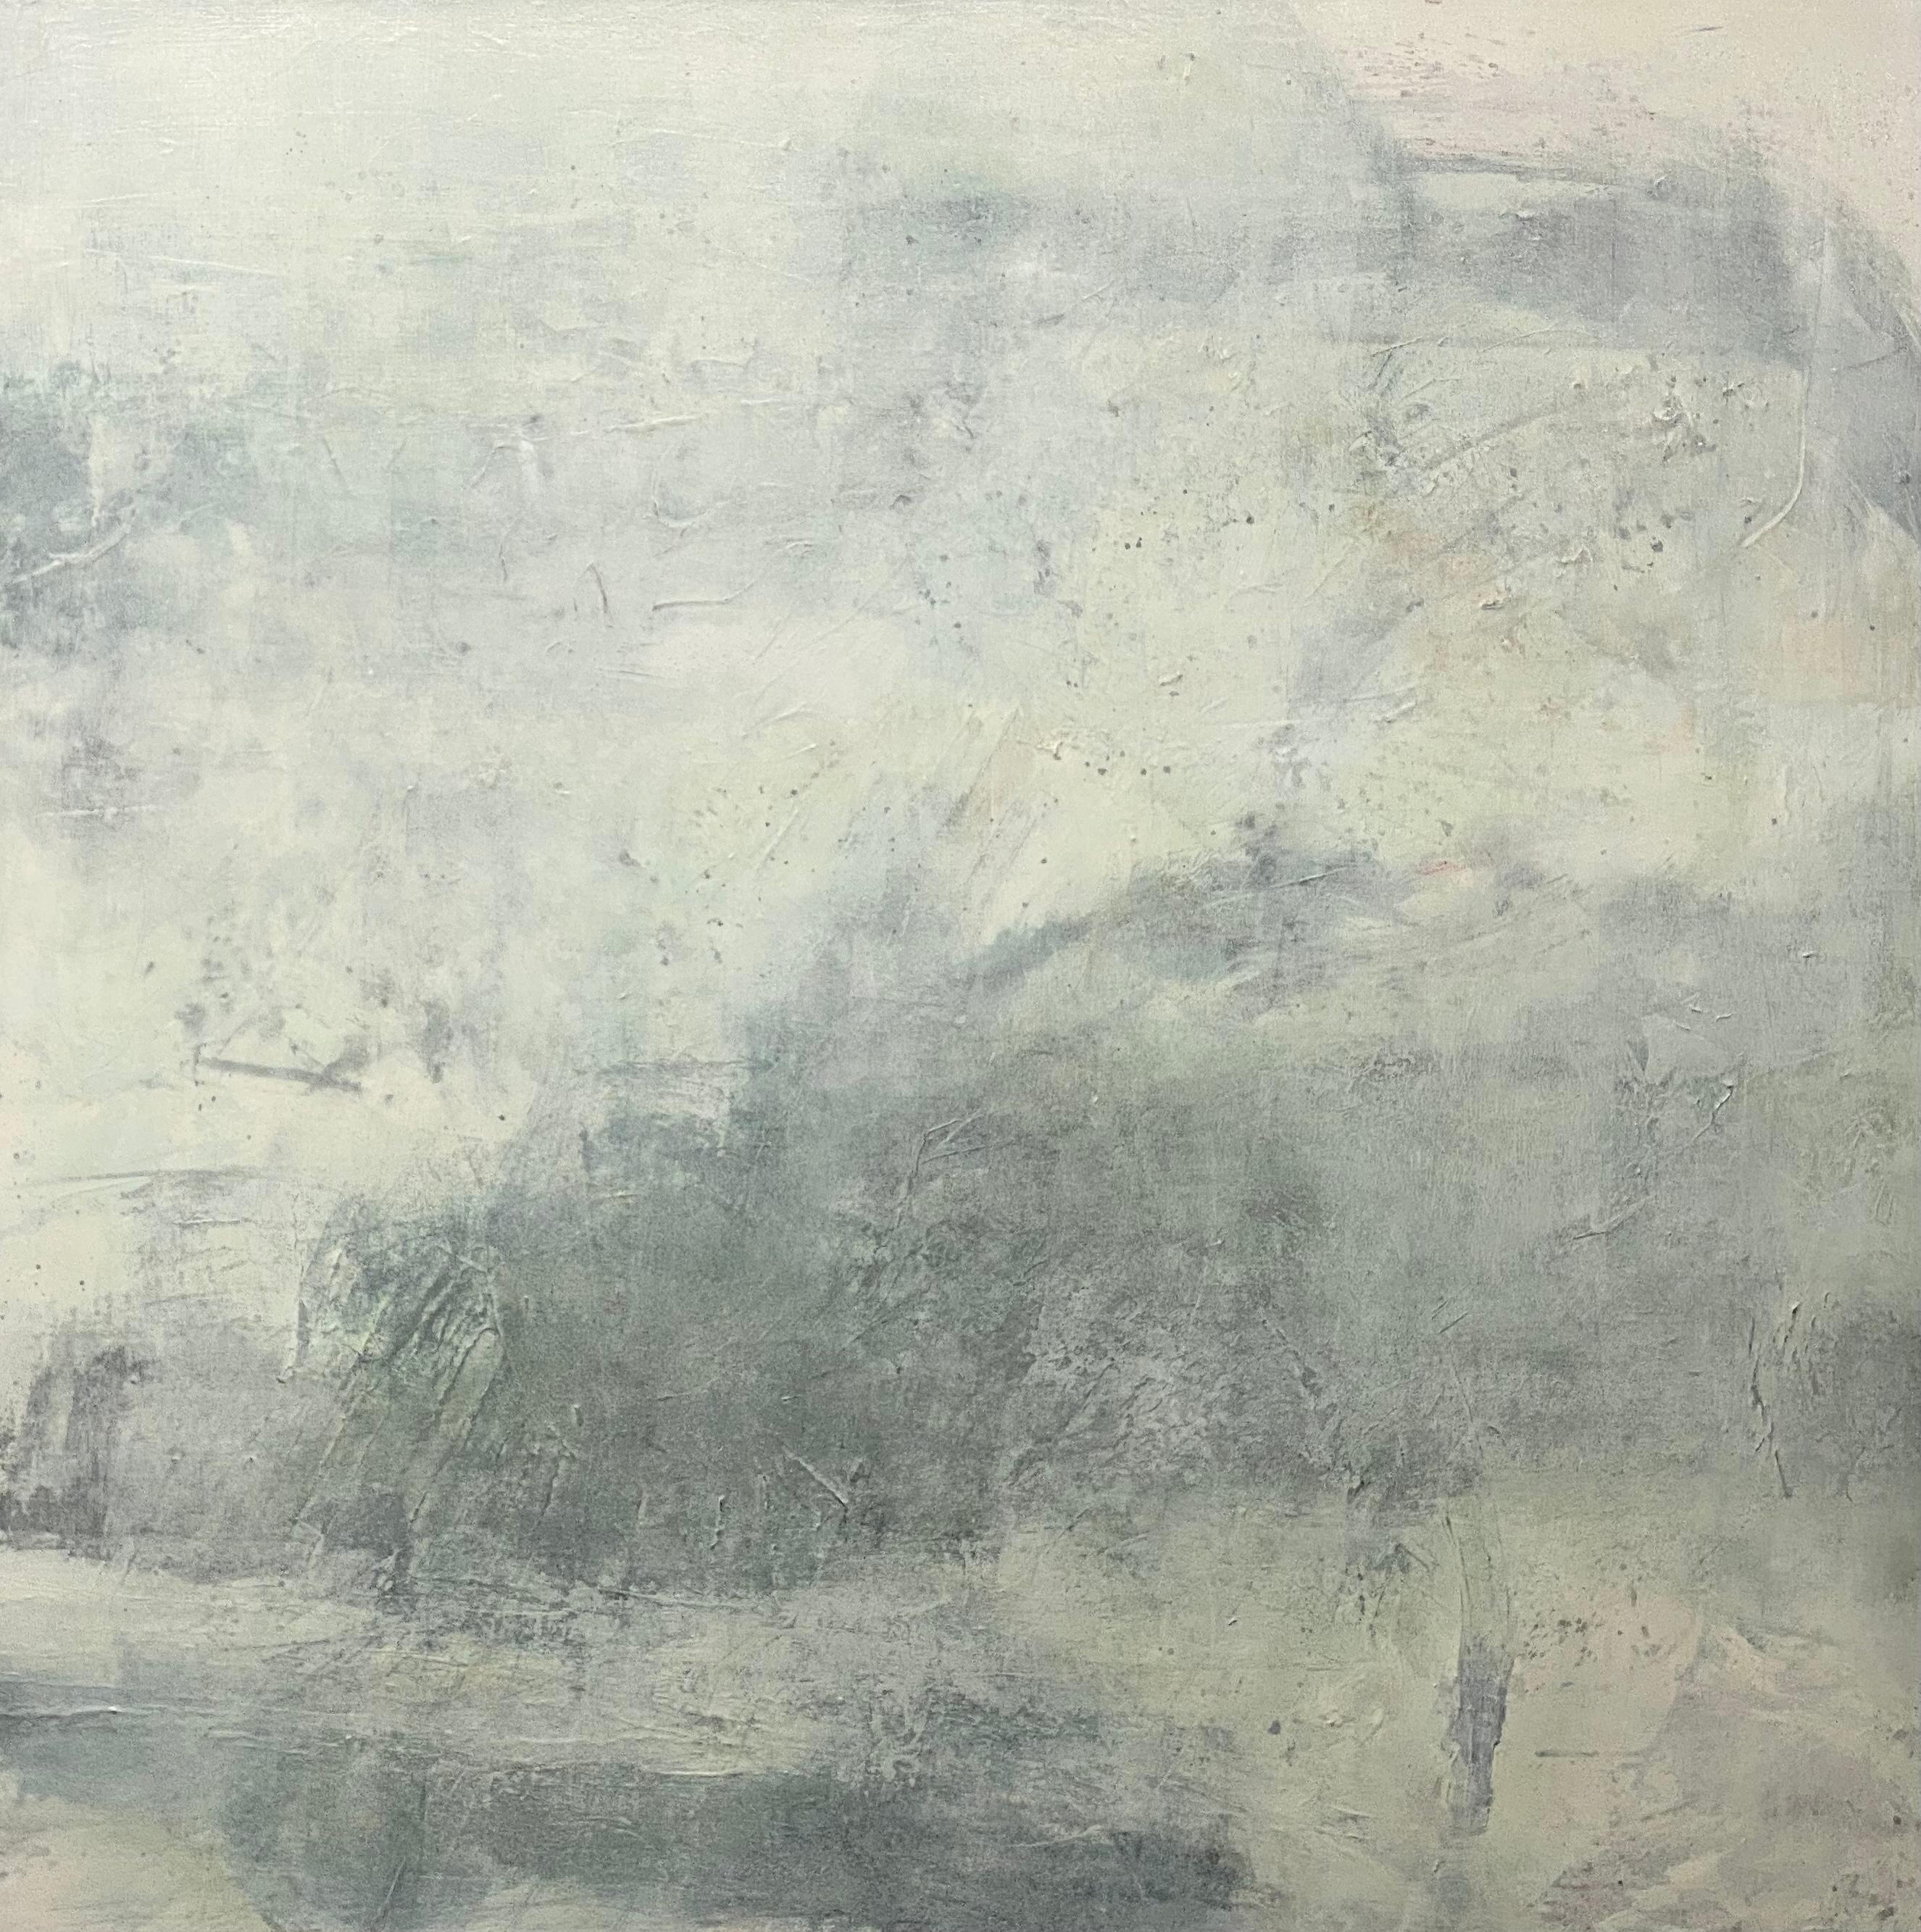 Juanita Bellavance  Landscape Painting - It was a misty day, Contemporary landscape, seafoam, ethereal abstract,  